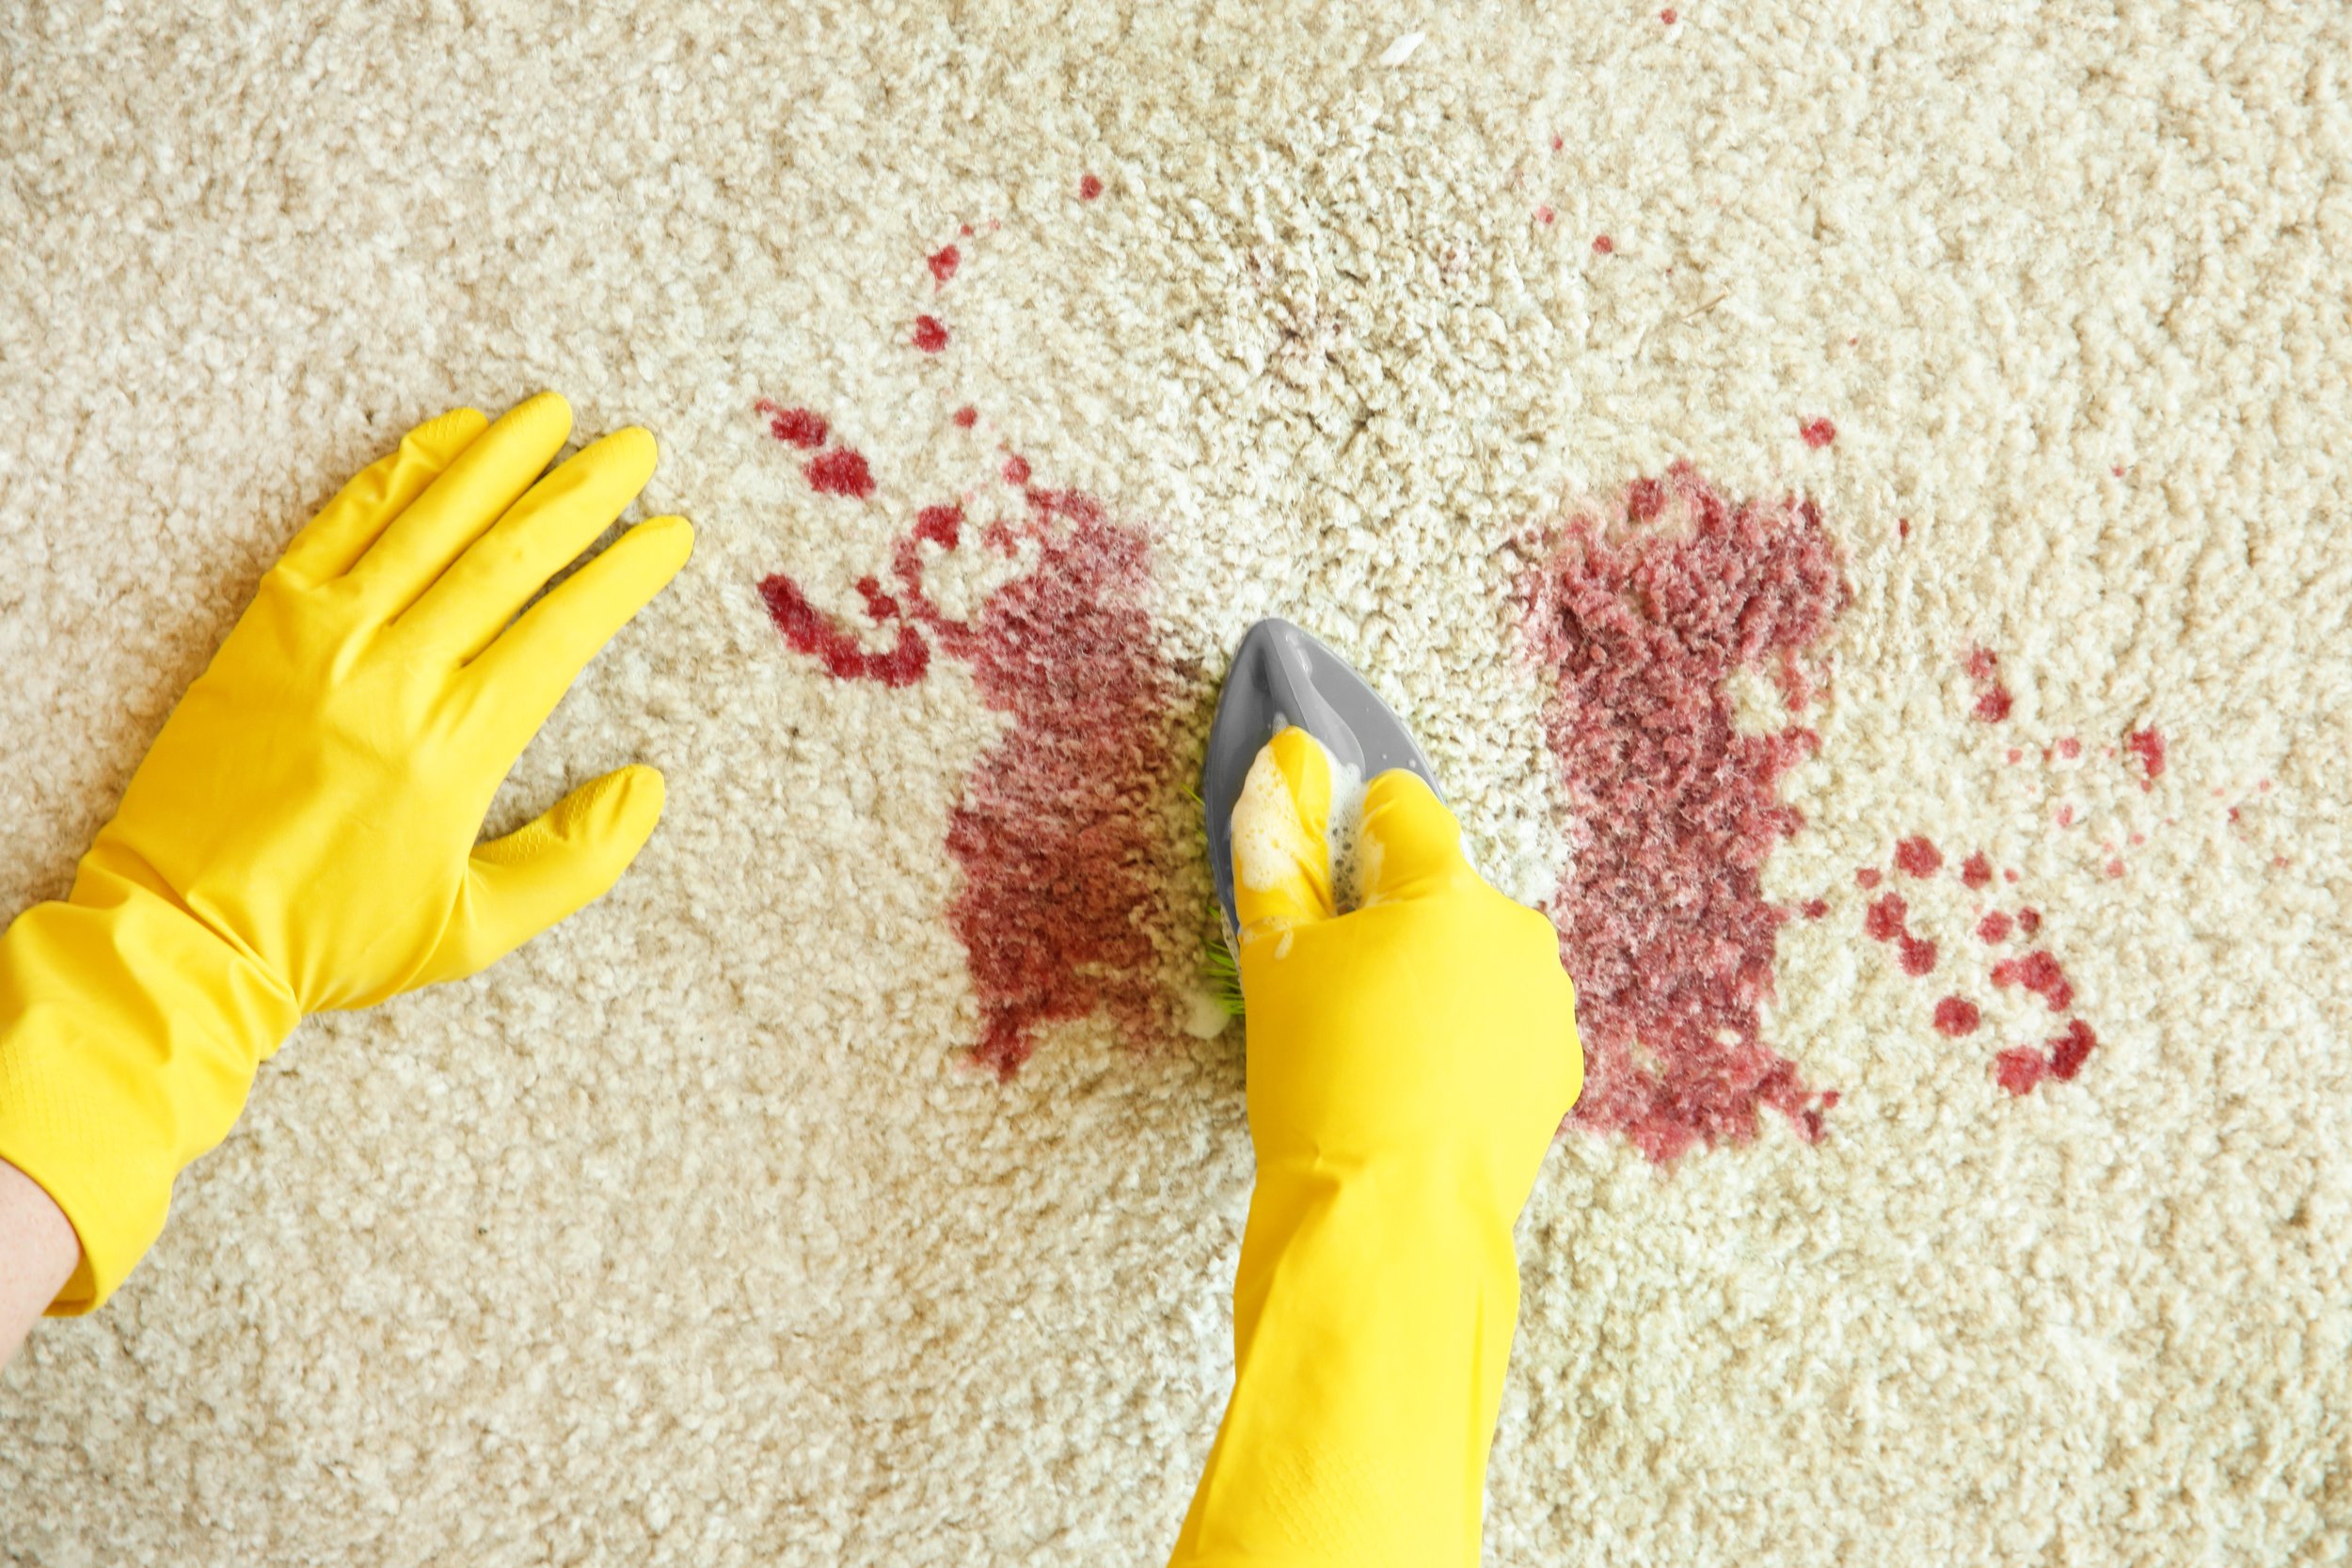 How to remove blood stains from carpet - Carpet Bright UK